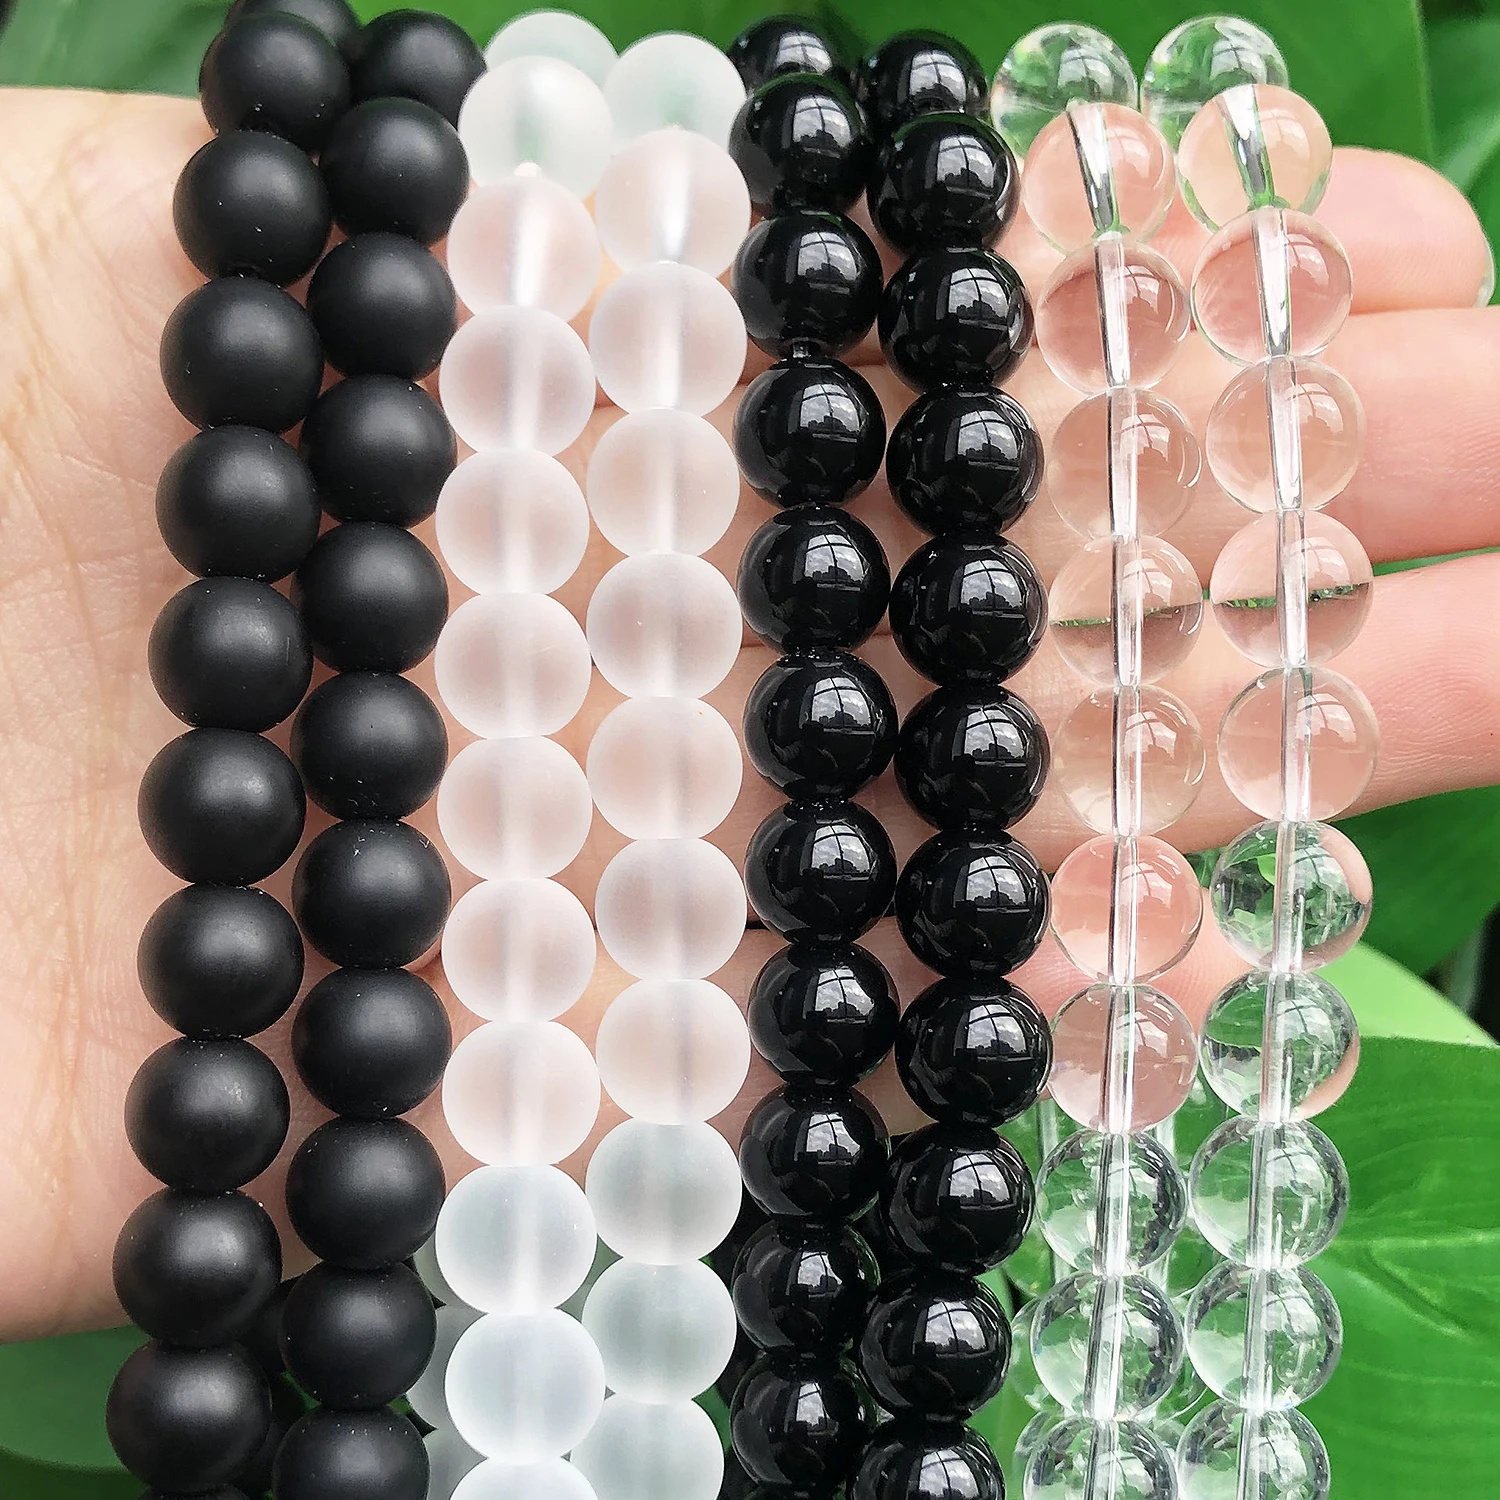 Wholesale 2-8mm Black White Glass Crystal Beads Charms Round Loose Spacer  Beads For Jewelry Making Handmade Bracelet Accessories - AliExpress